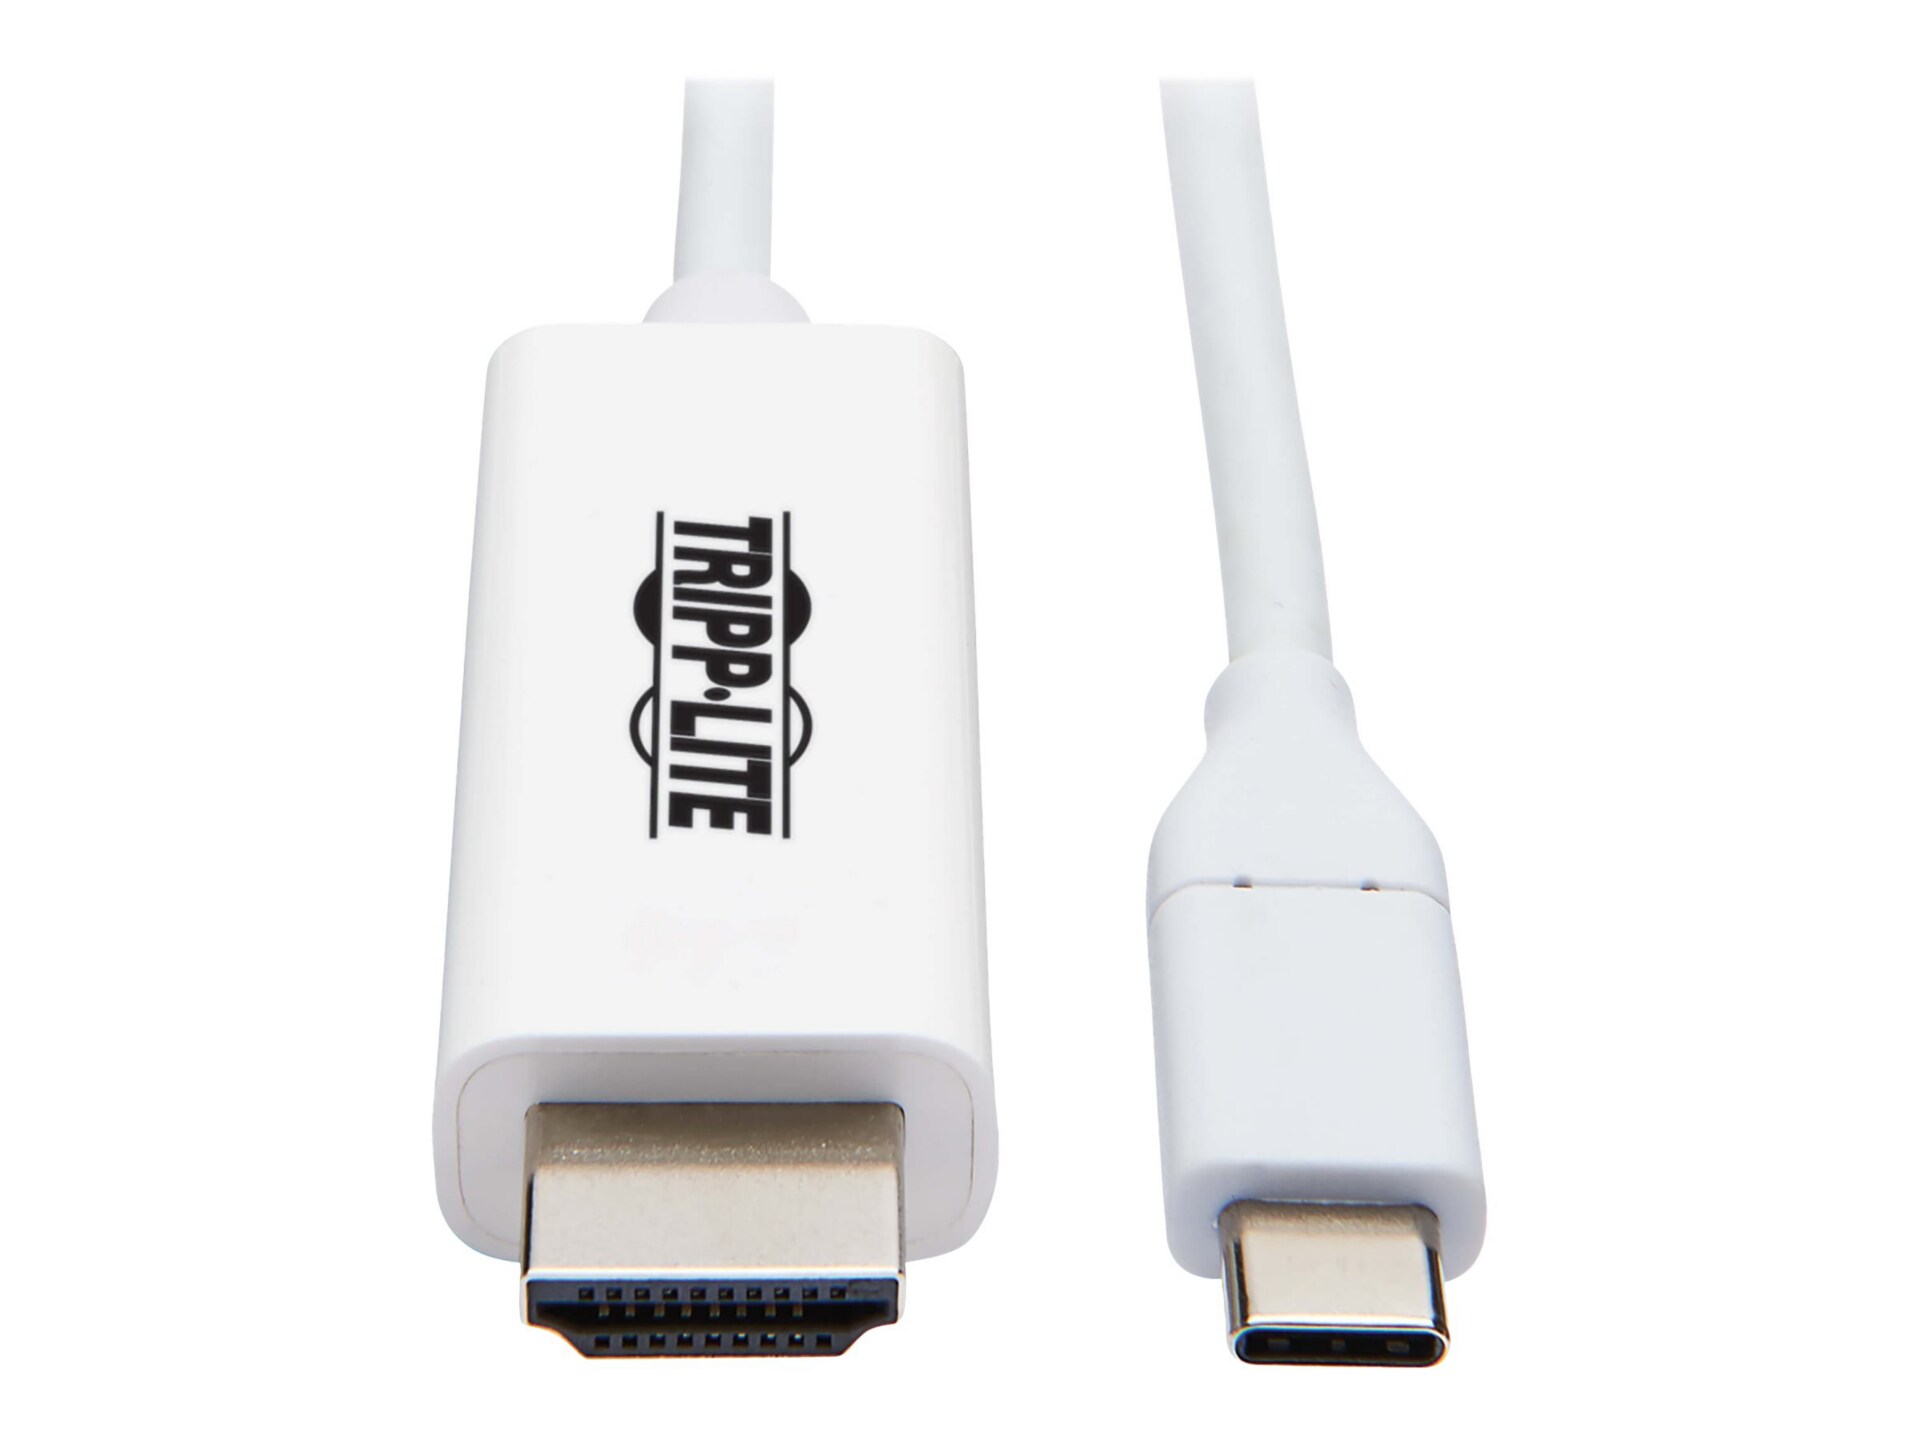 Tripp Lite USB C to HDMI Adapter Cable USB 3.1 Gen 1 4K M/M USB-C White 3ft - video cable - HDMI / USB - 3 ft